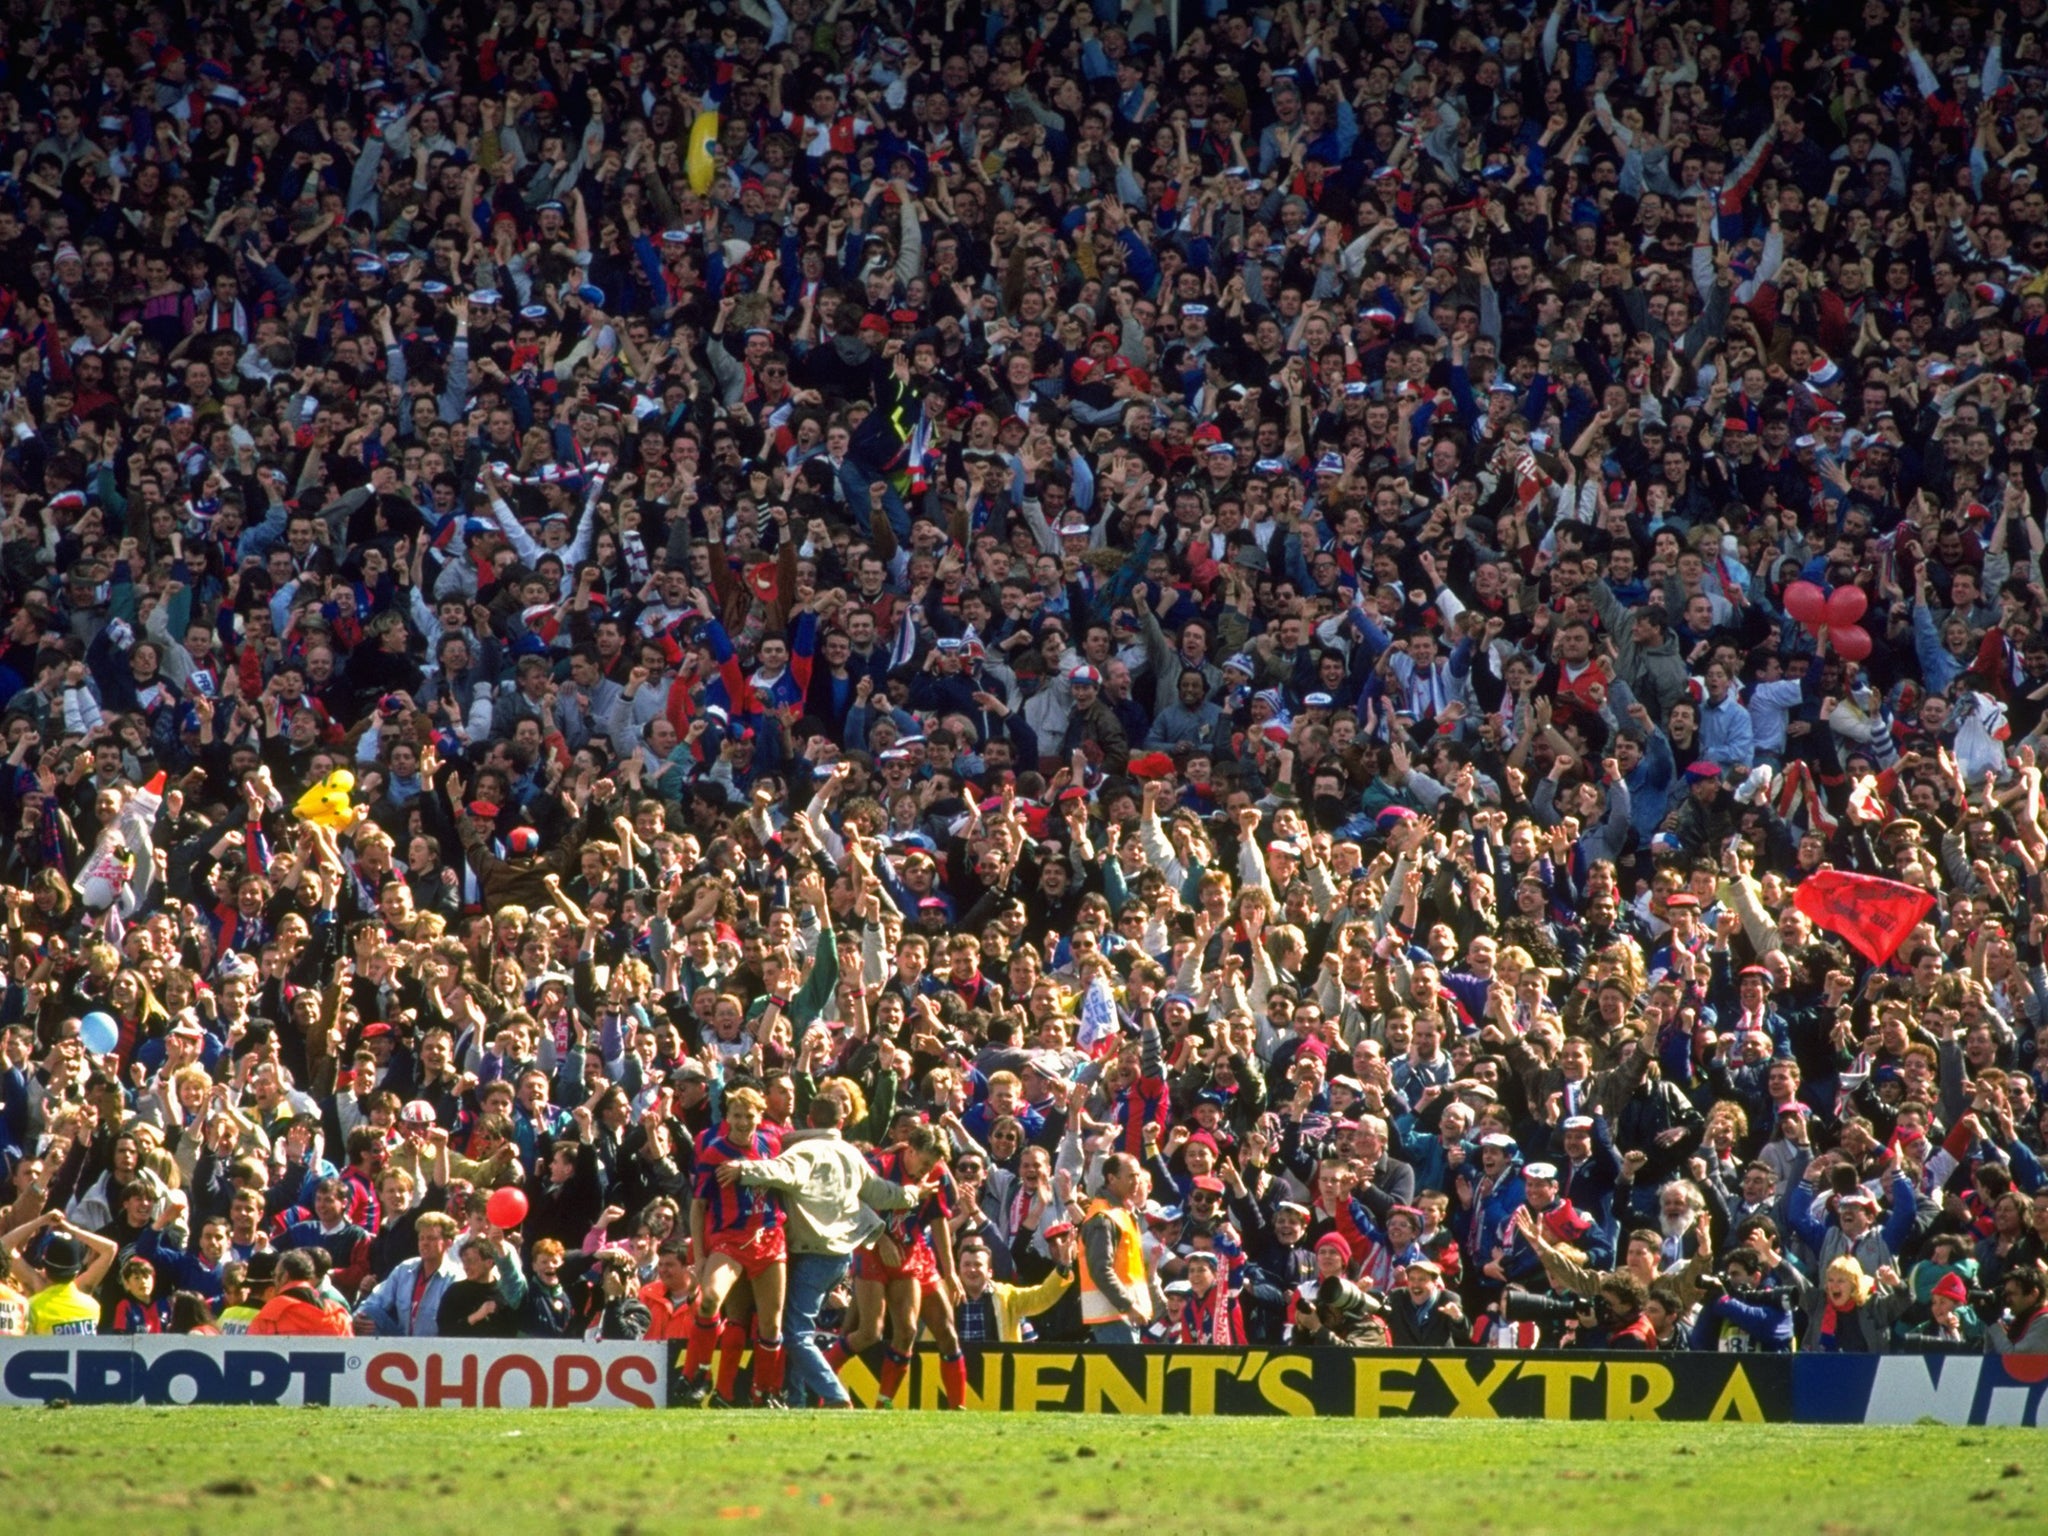 Pardew celebrates in front of Palace fans after scoring in the 1990 FA Cup semi-final